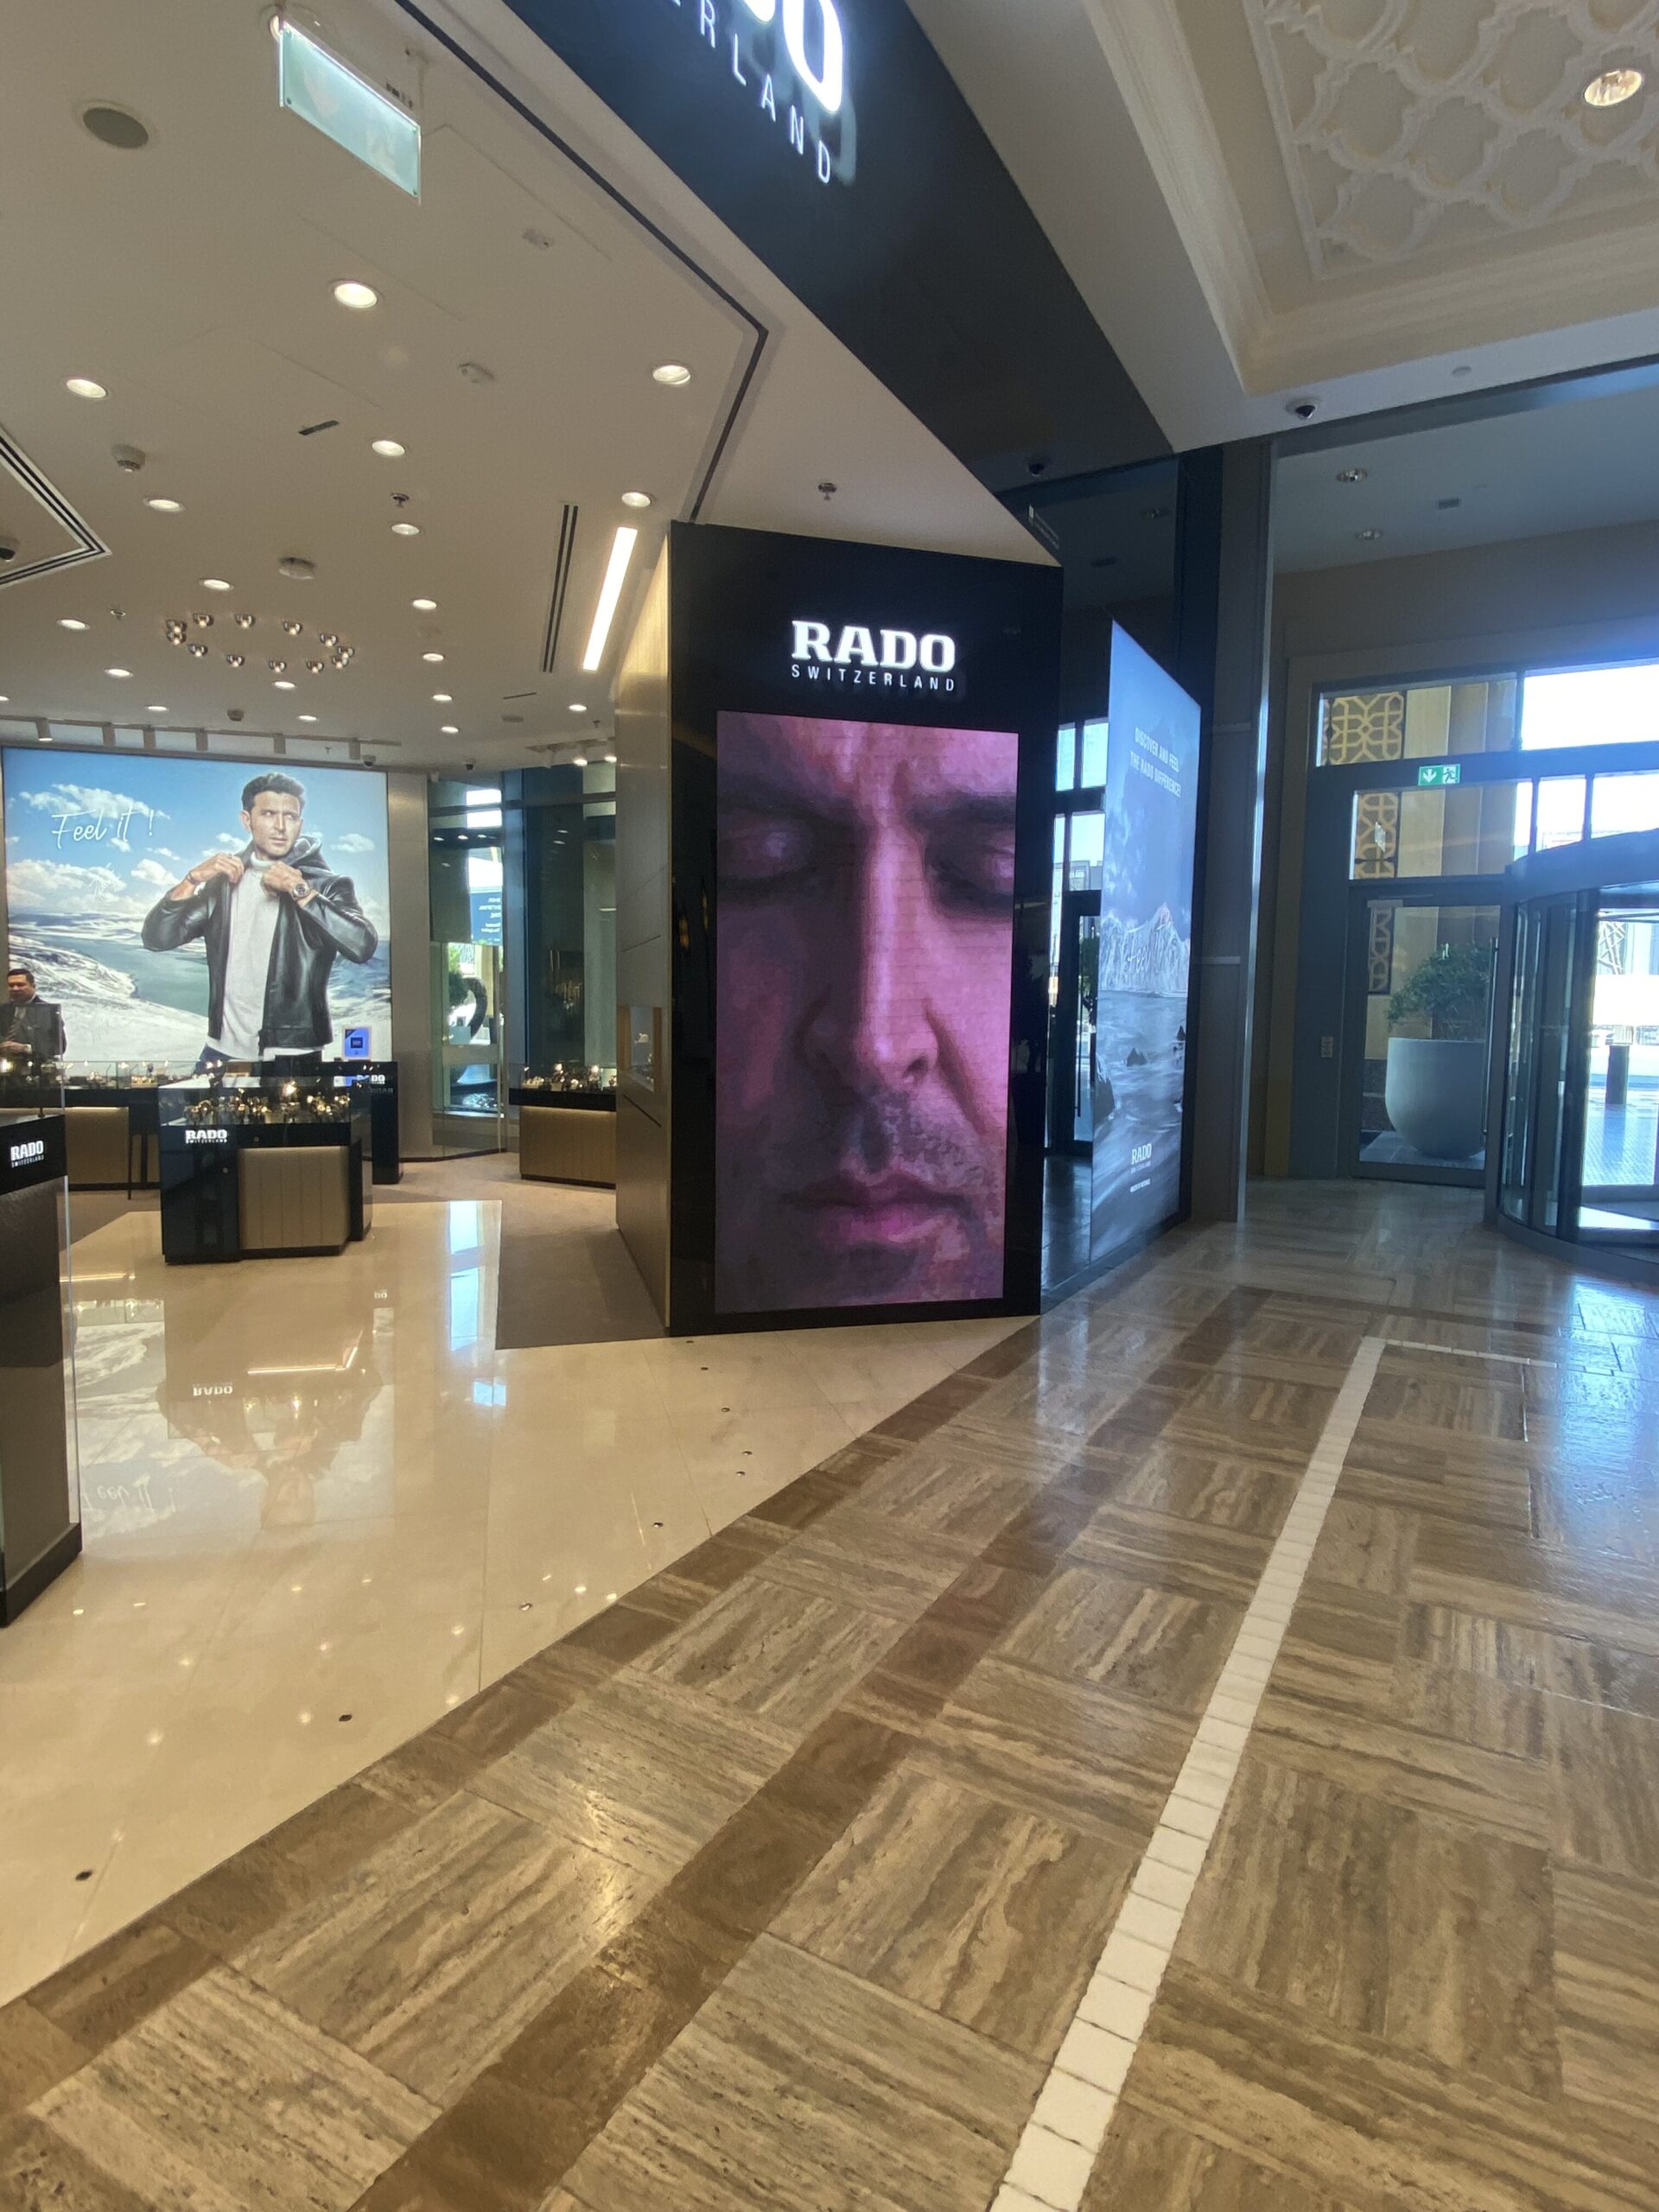 Rado retail shop LED screen installed by best indoor LED screen supplier in UAE